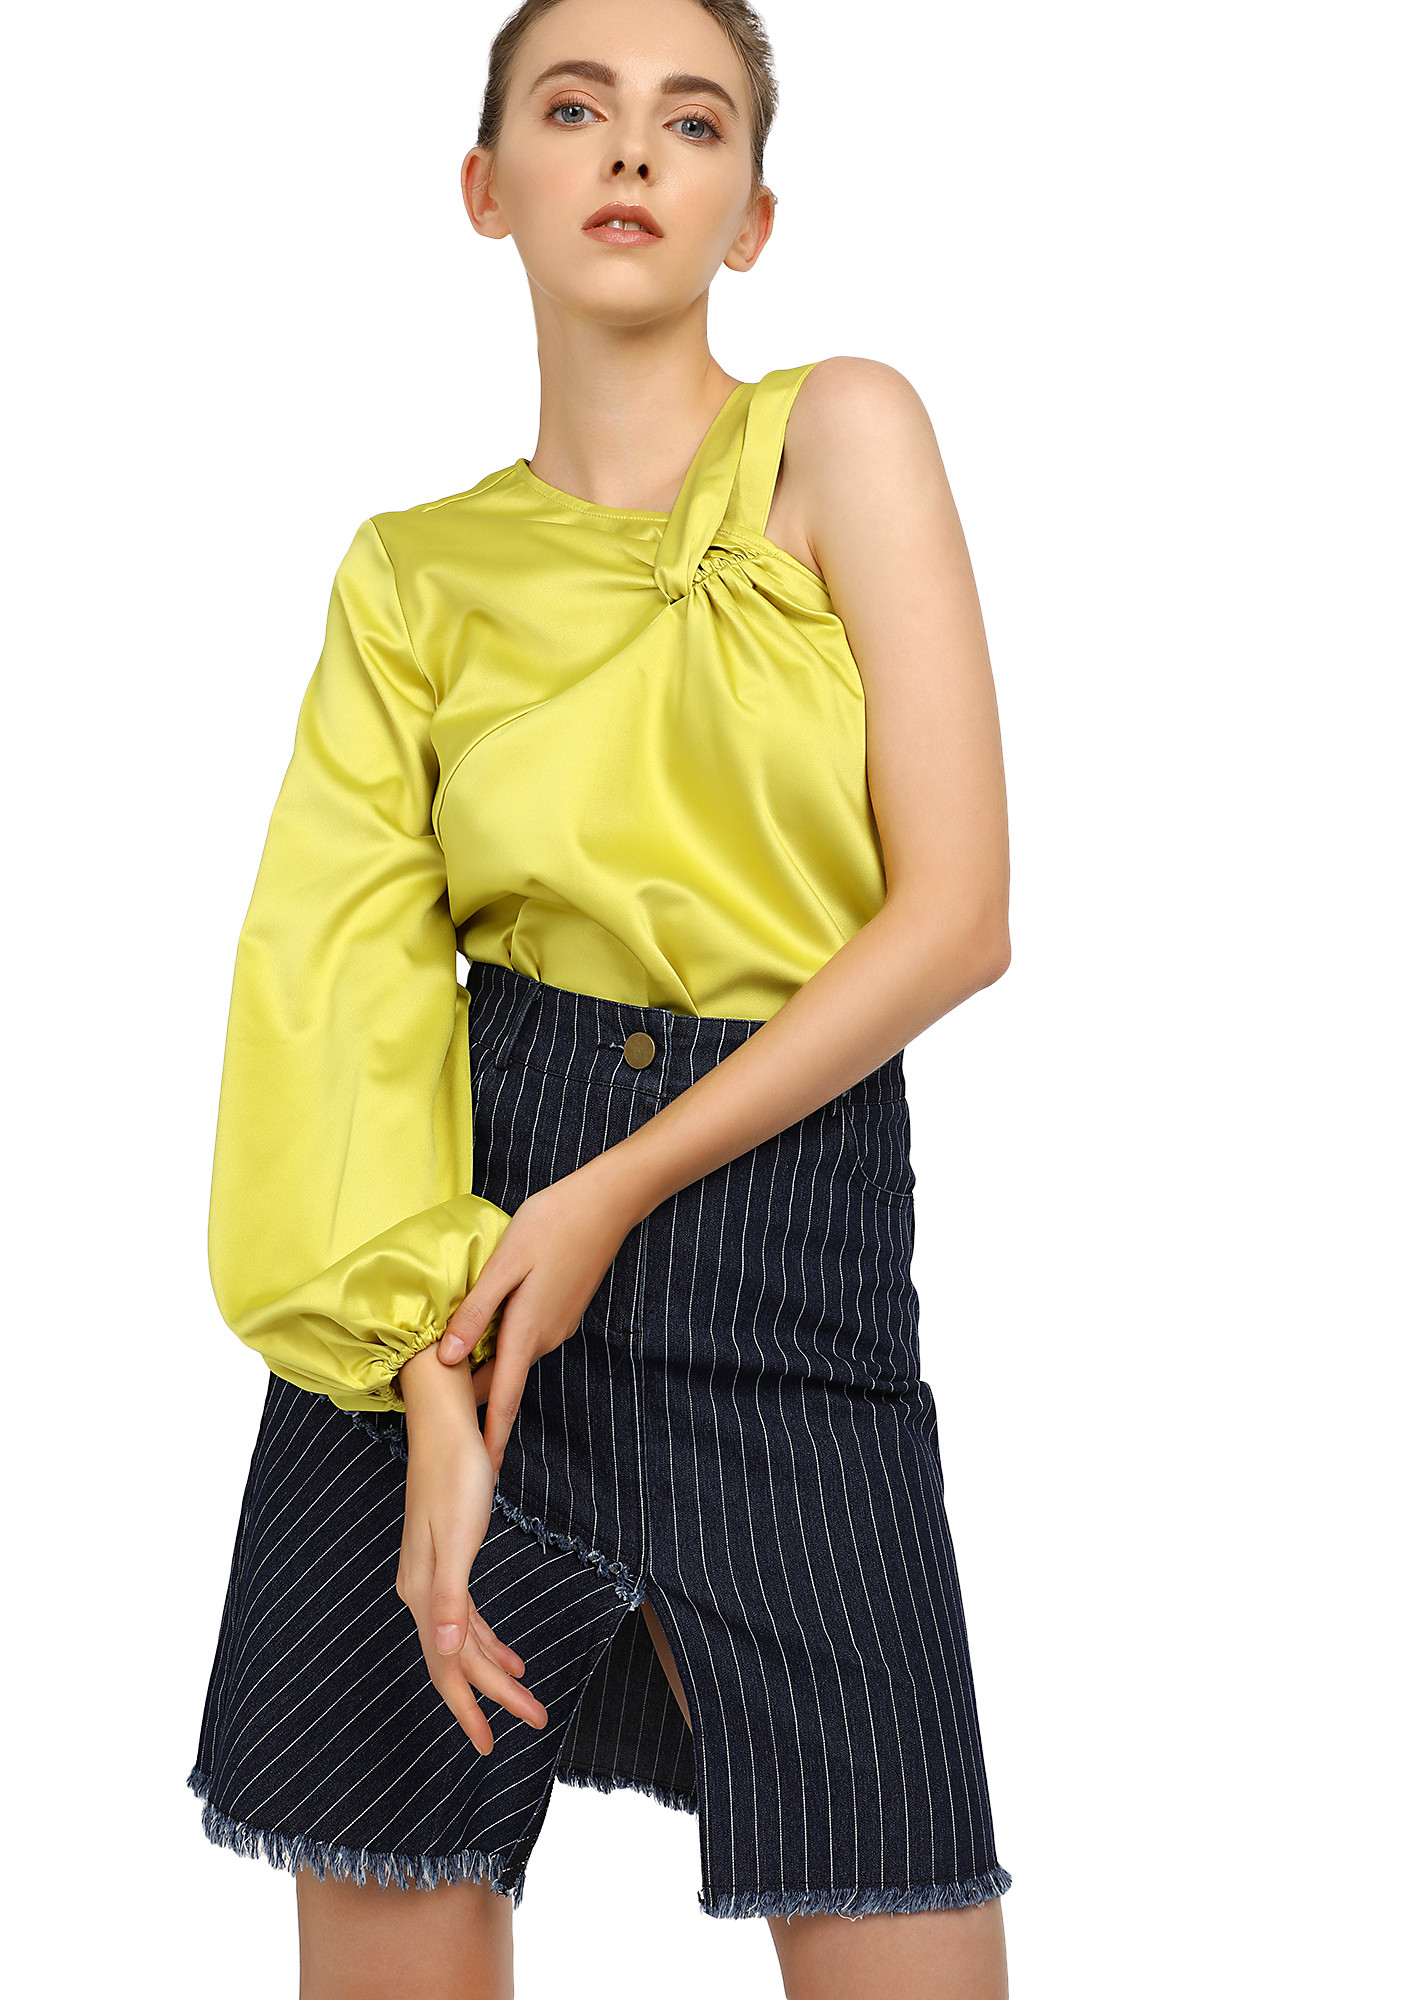 BUZZ OFF LIME YELLOW BLOUSE